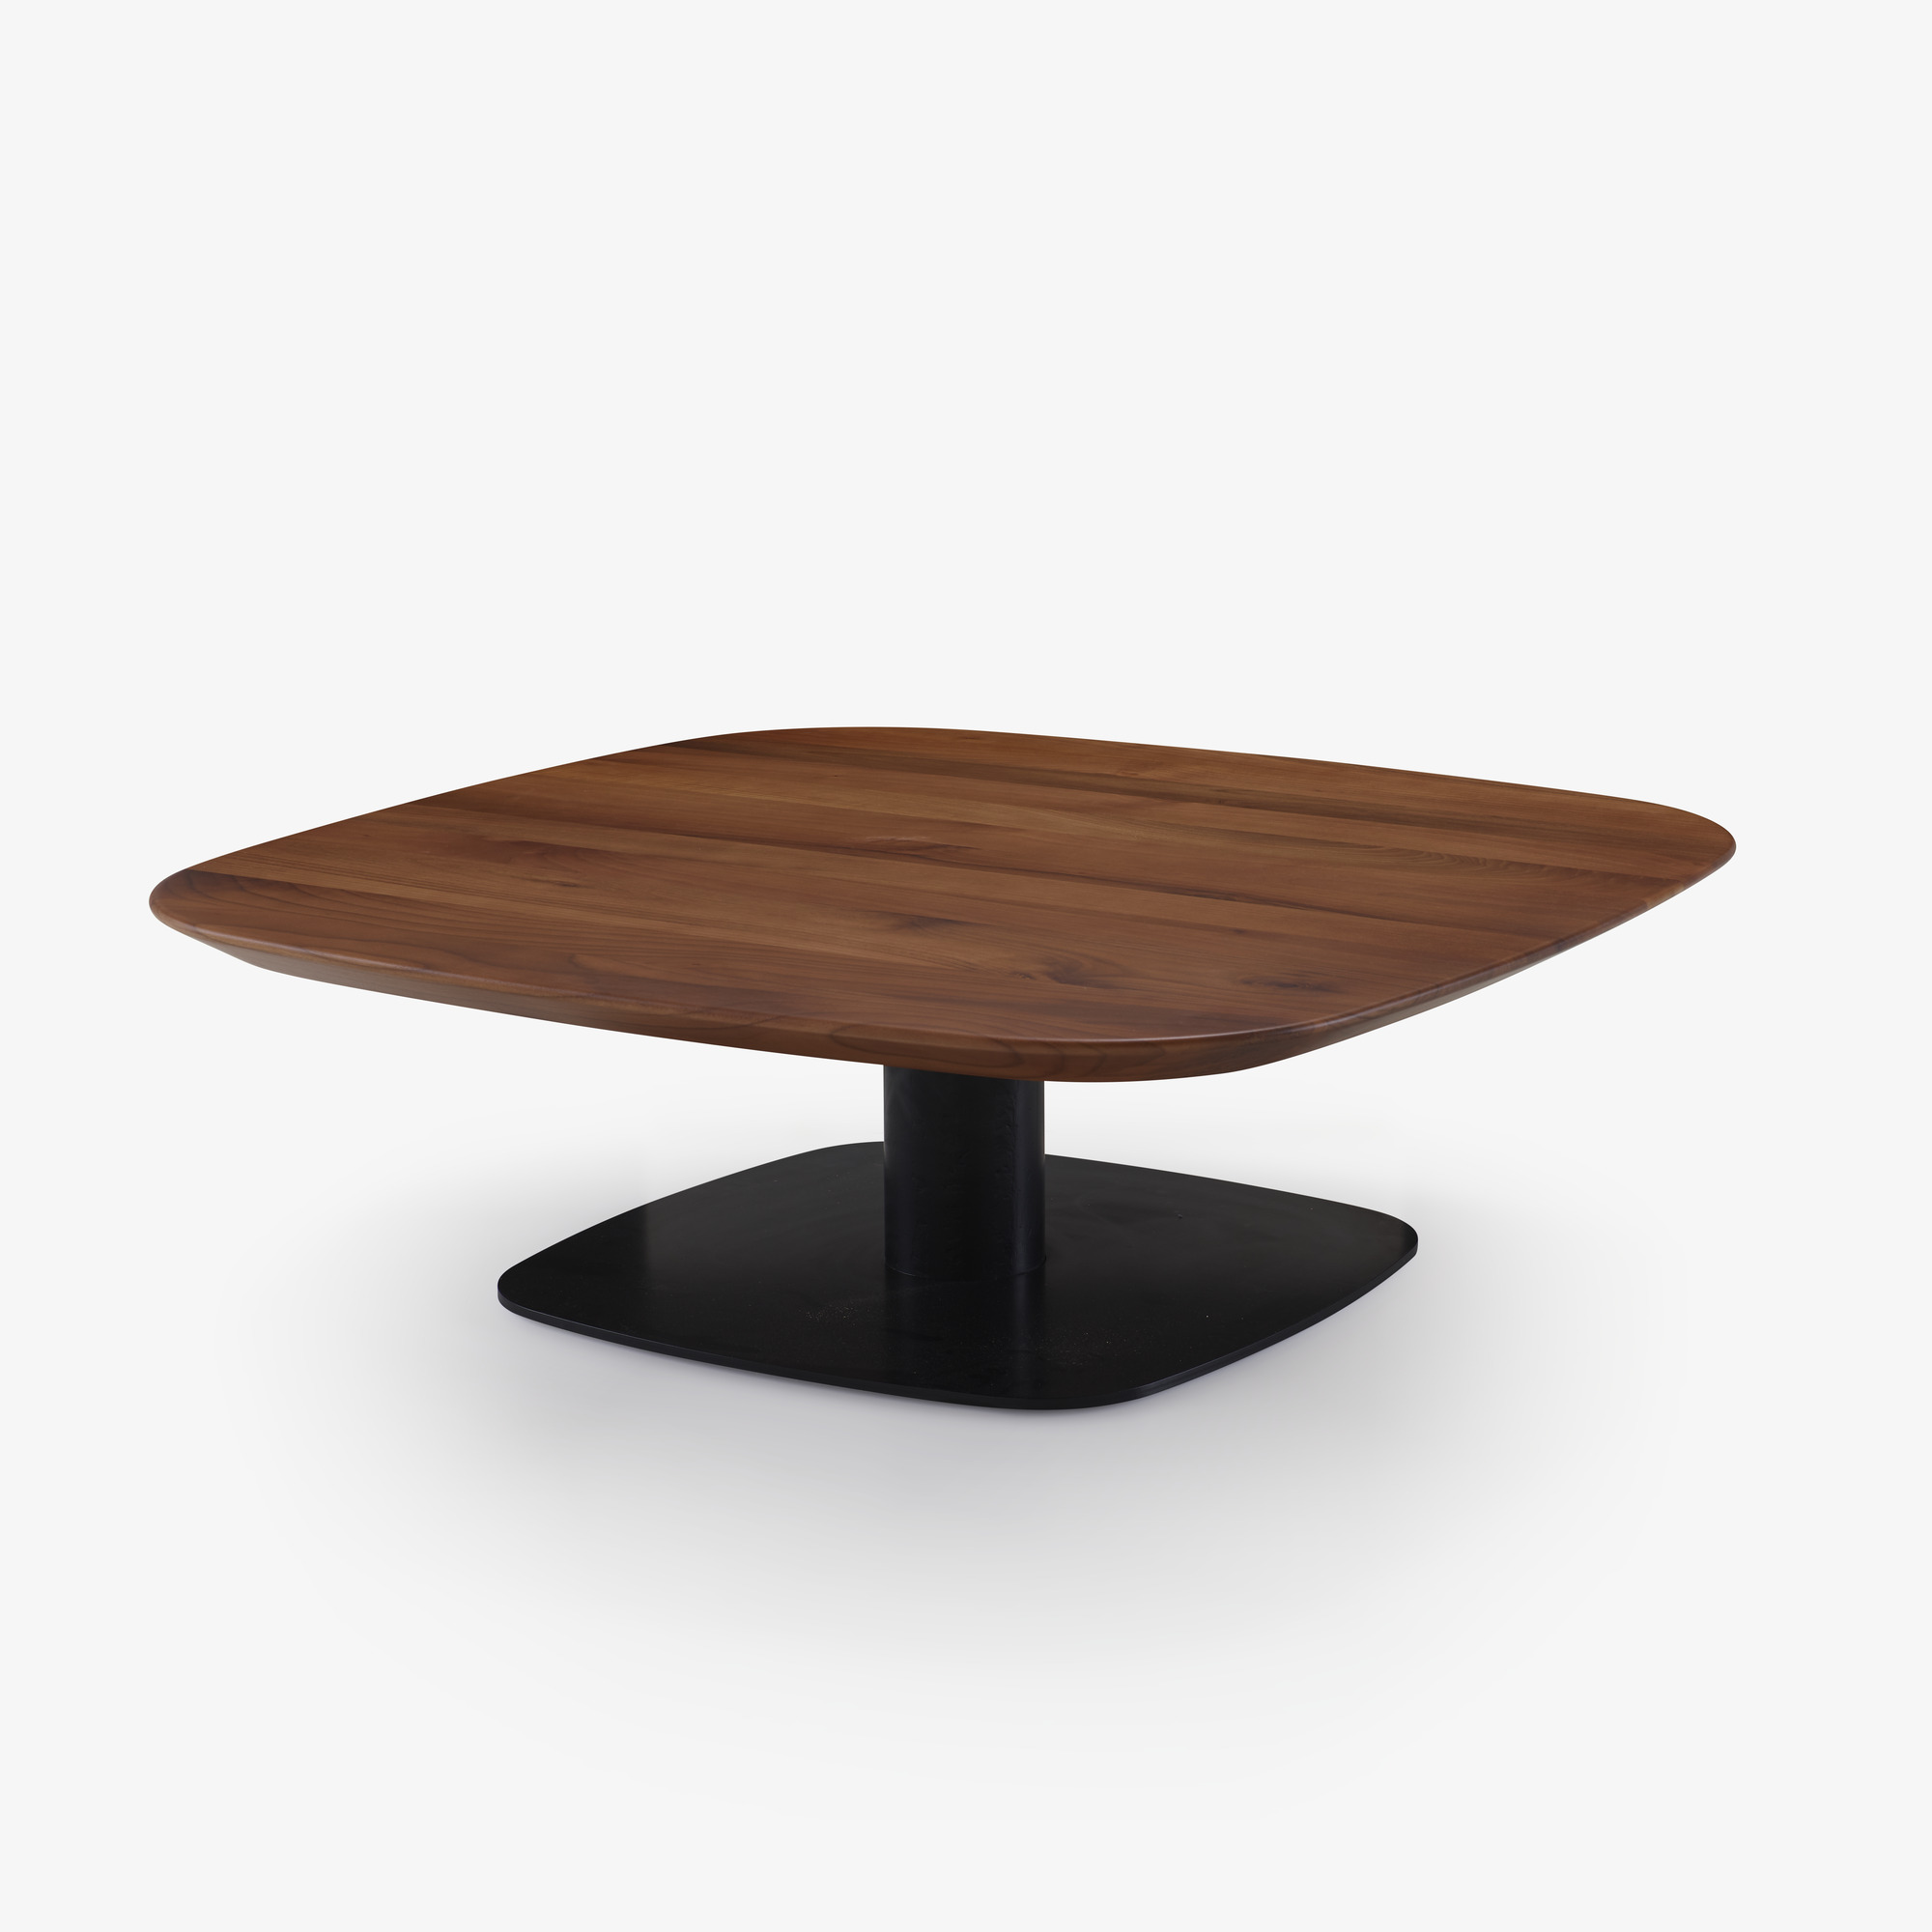 Image Low table walnut top black lacquered base 2